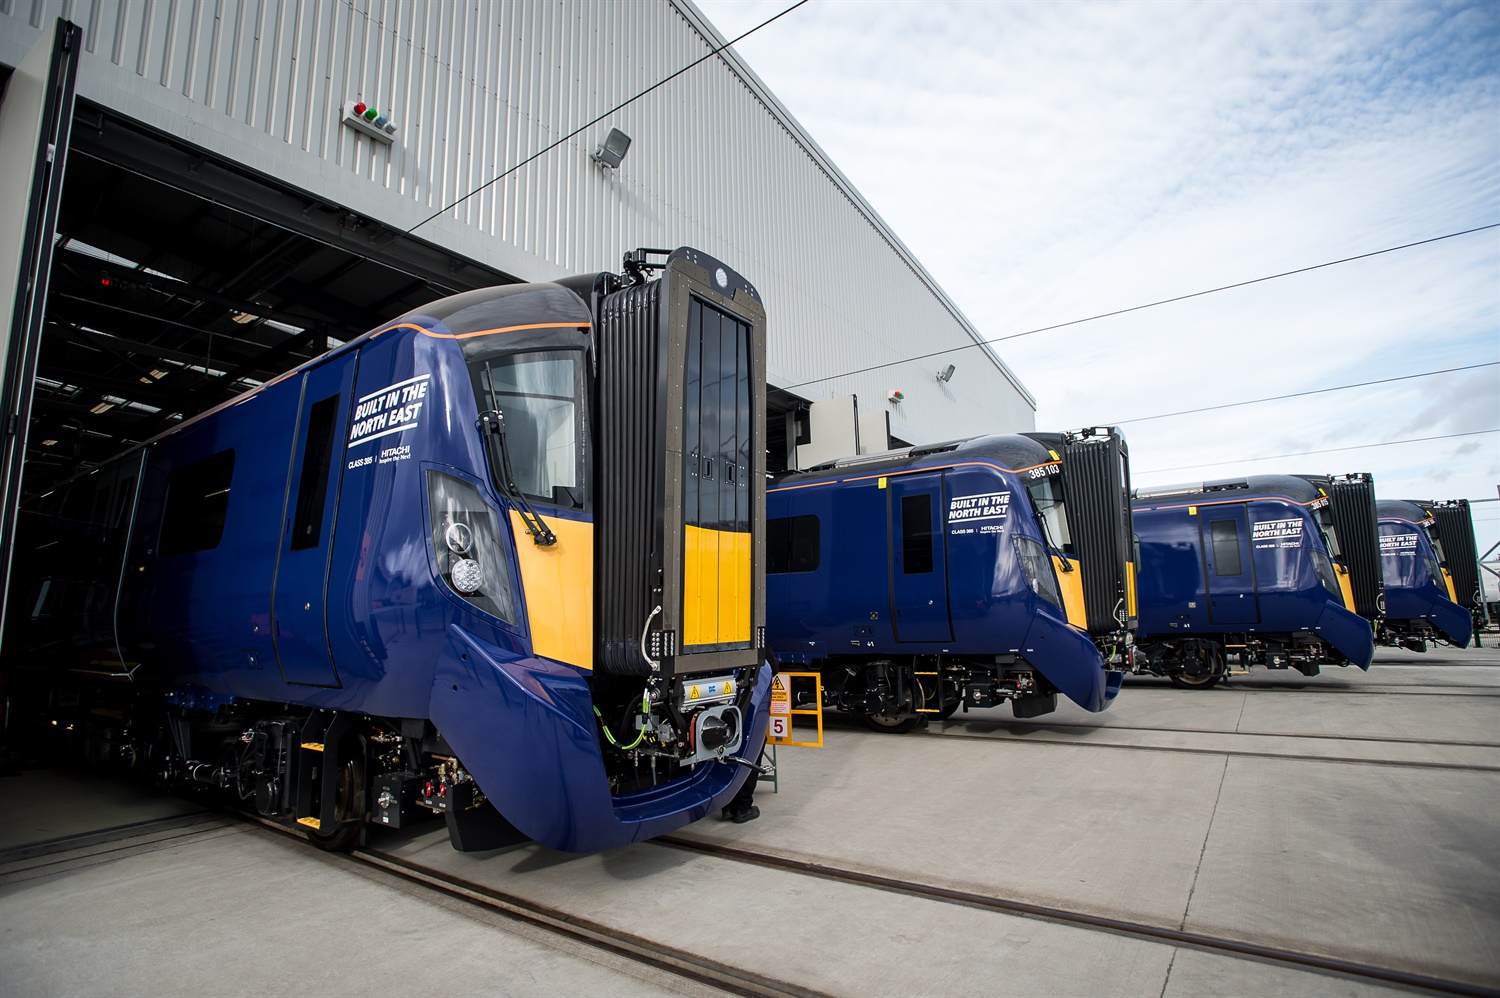 ScotRail’s new fleet of electric trains make first journey